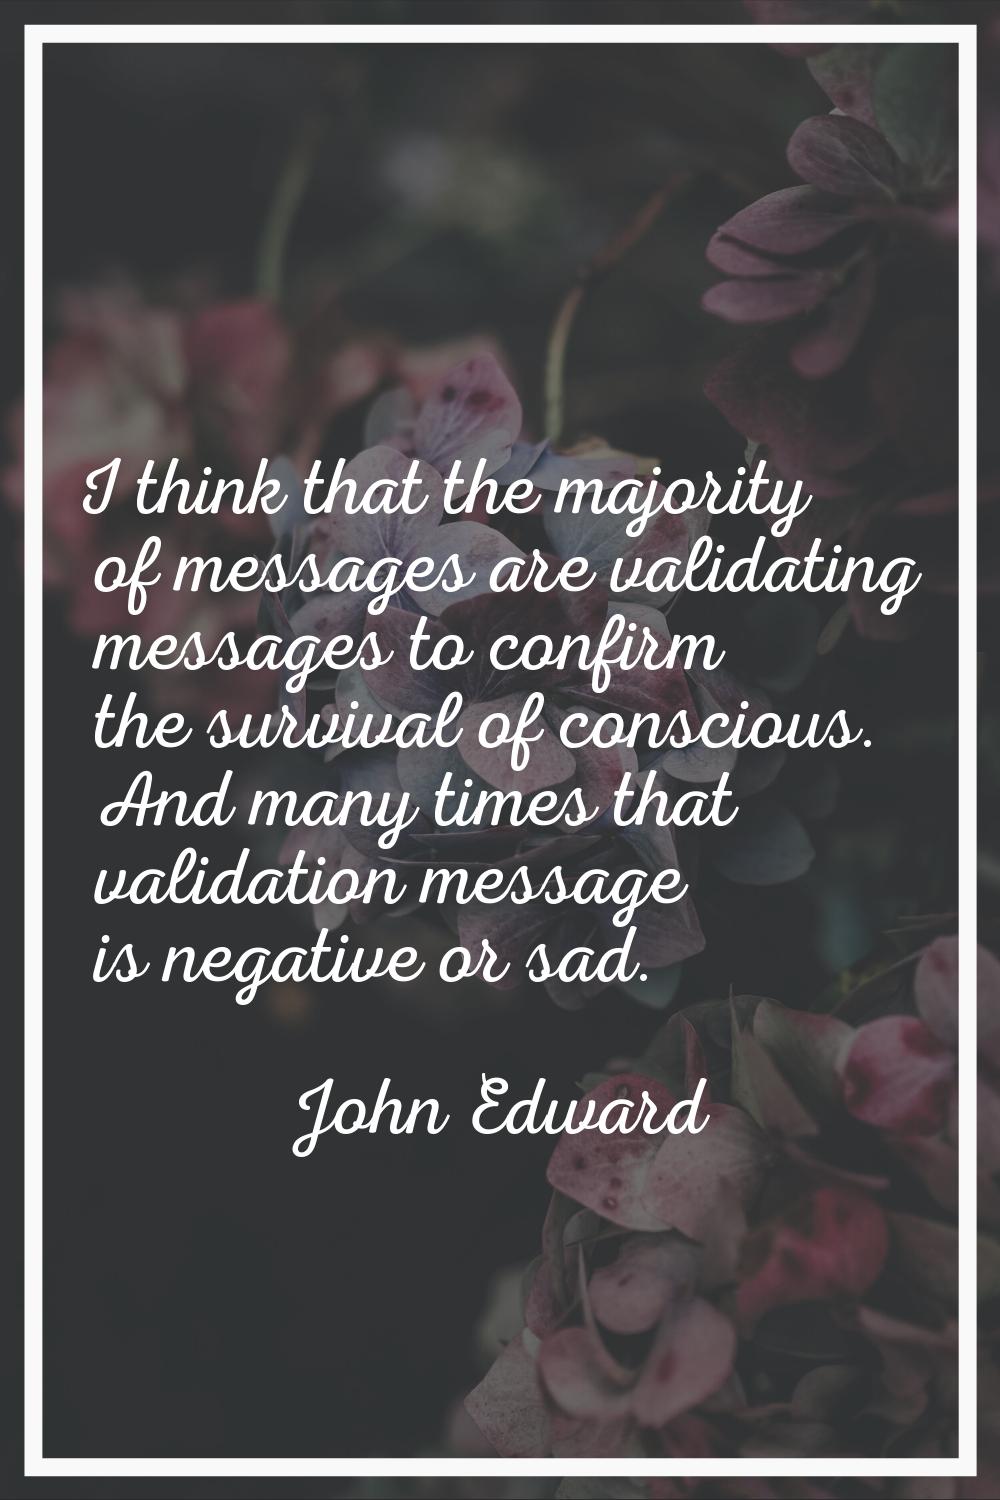 I think that the majority of messages are validating messages to confirm the survival of conscious.